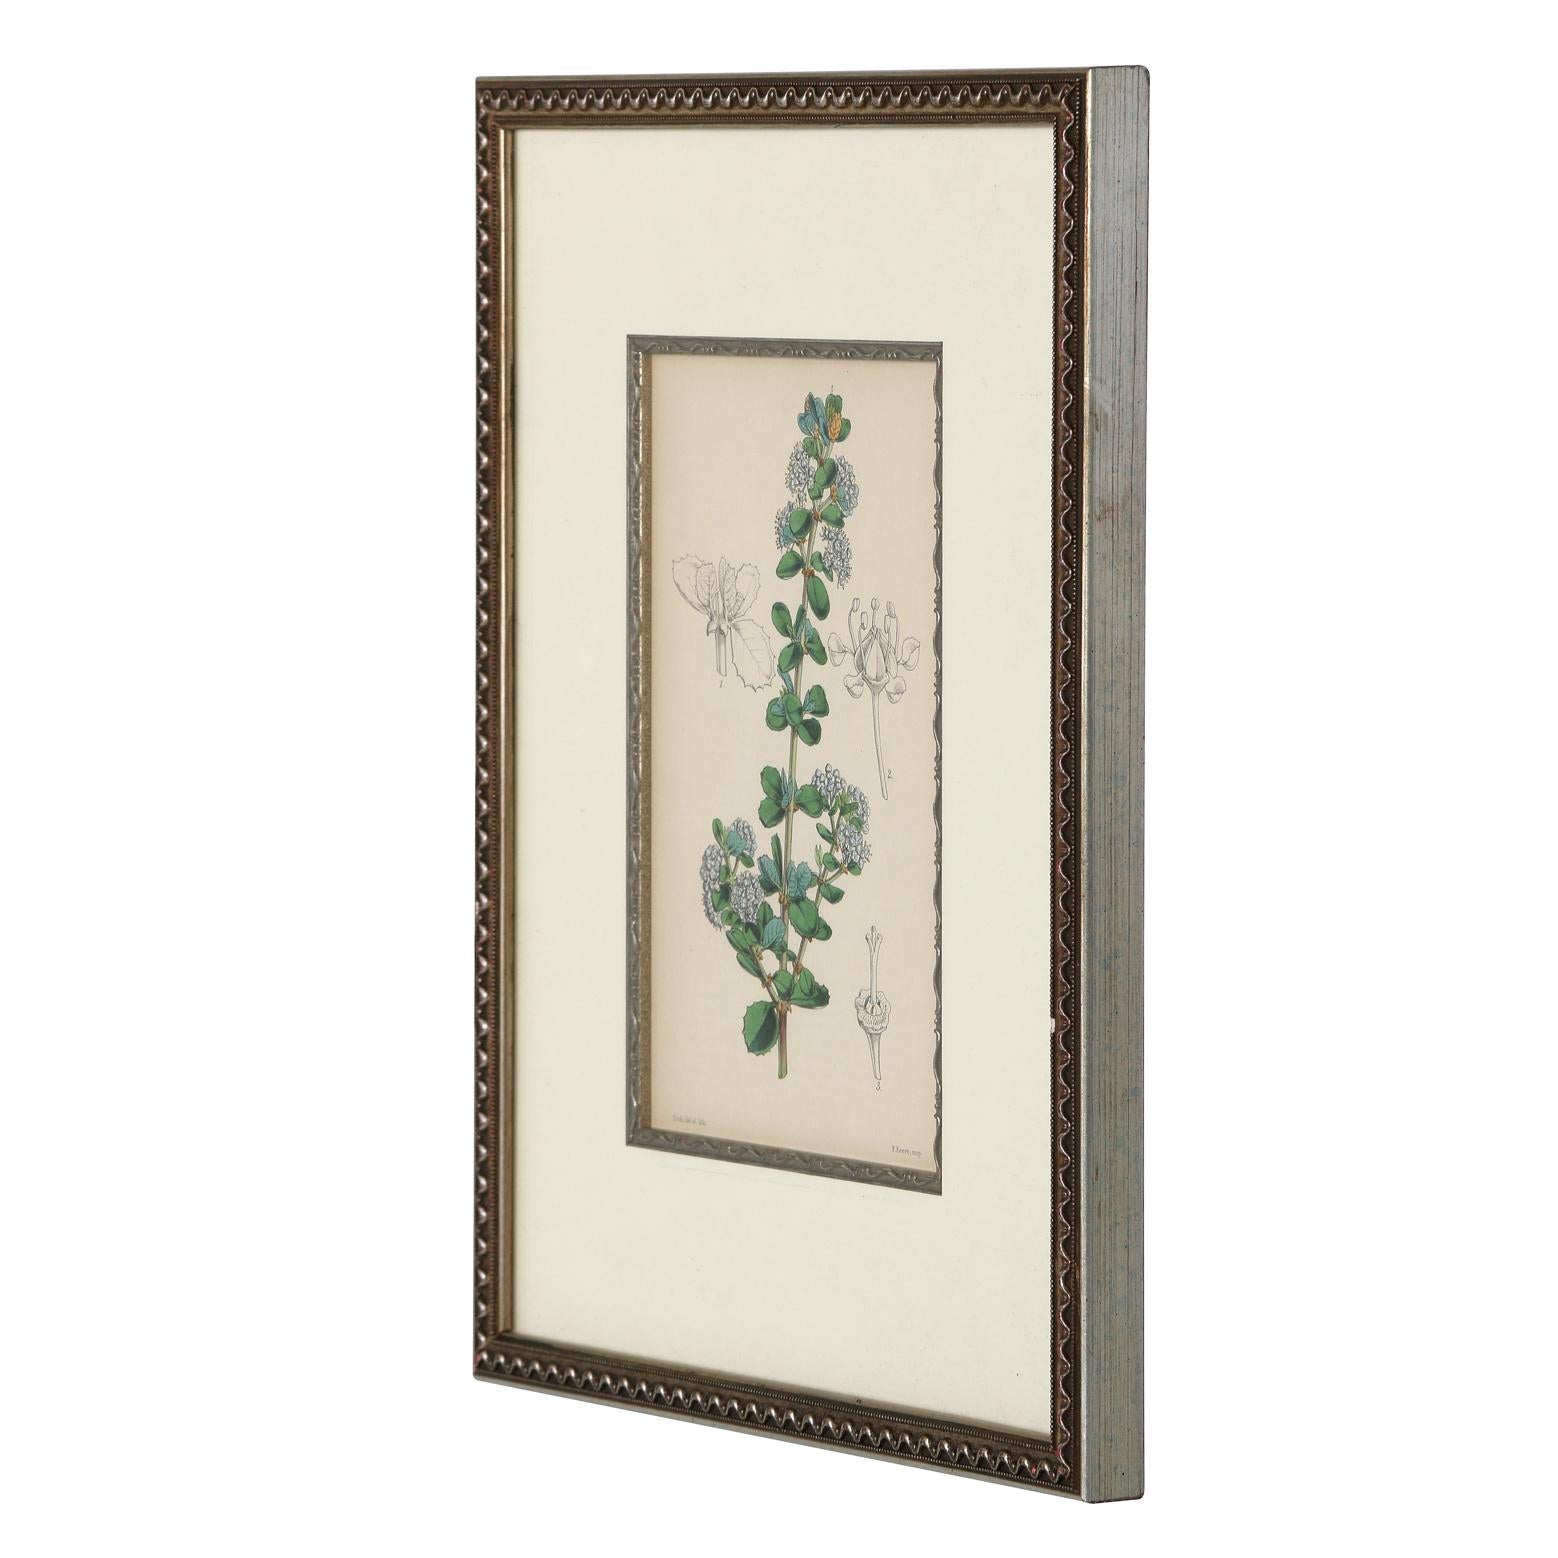 A series of four 19th-century botanical lithograph that can serve as a lovely layering piece in any room.  The lithographs are matted and framed in a metal molded frame, with the added detail of an interior fillet bordering the interior of the mat.